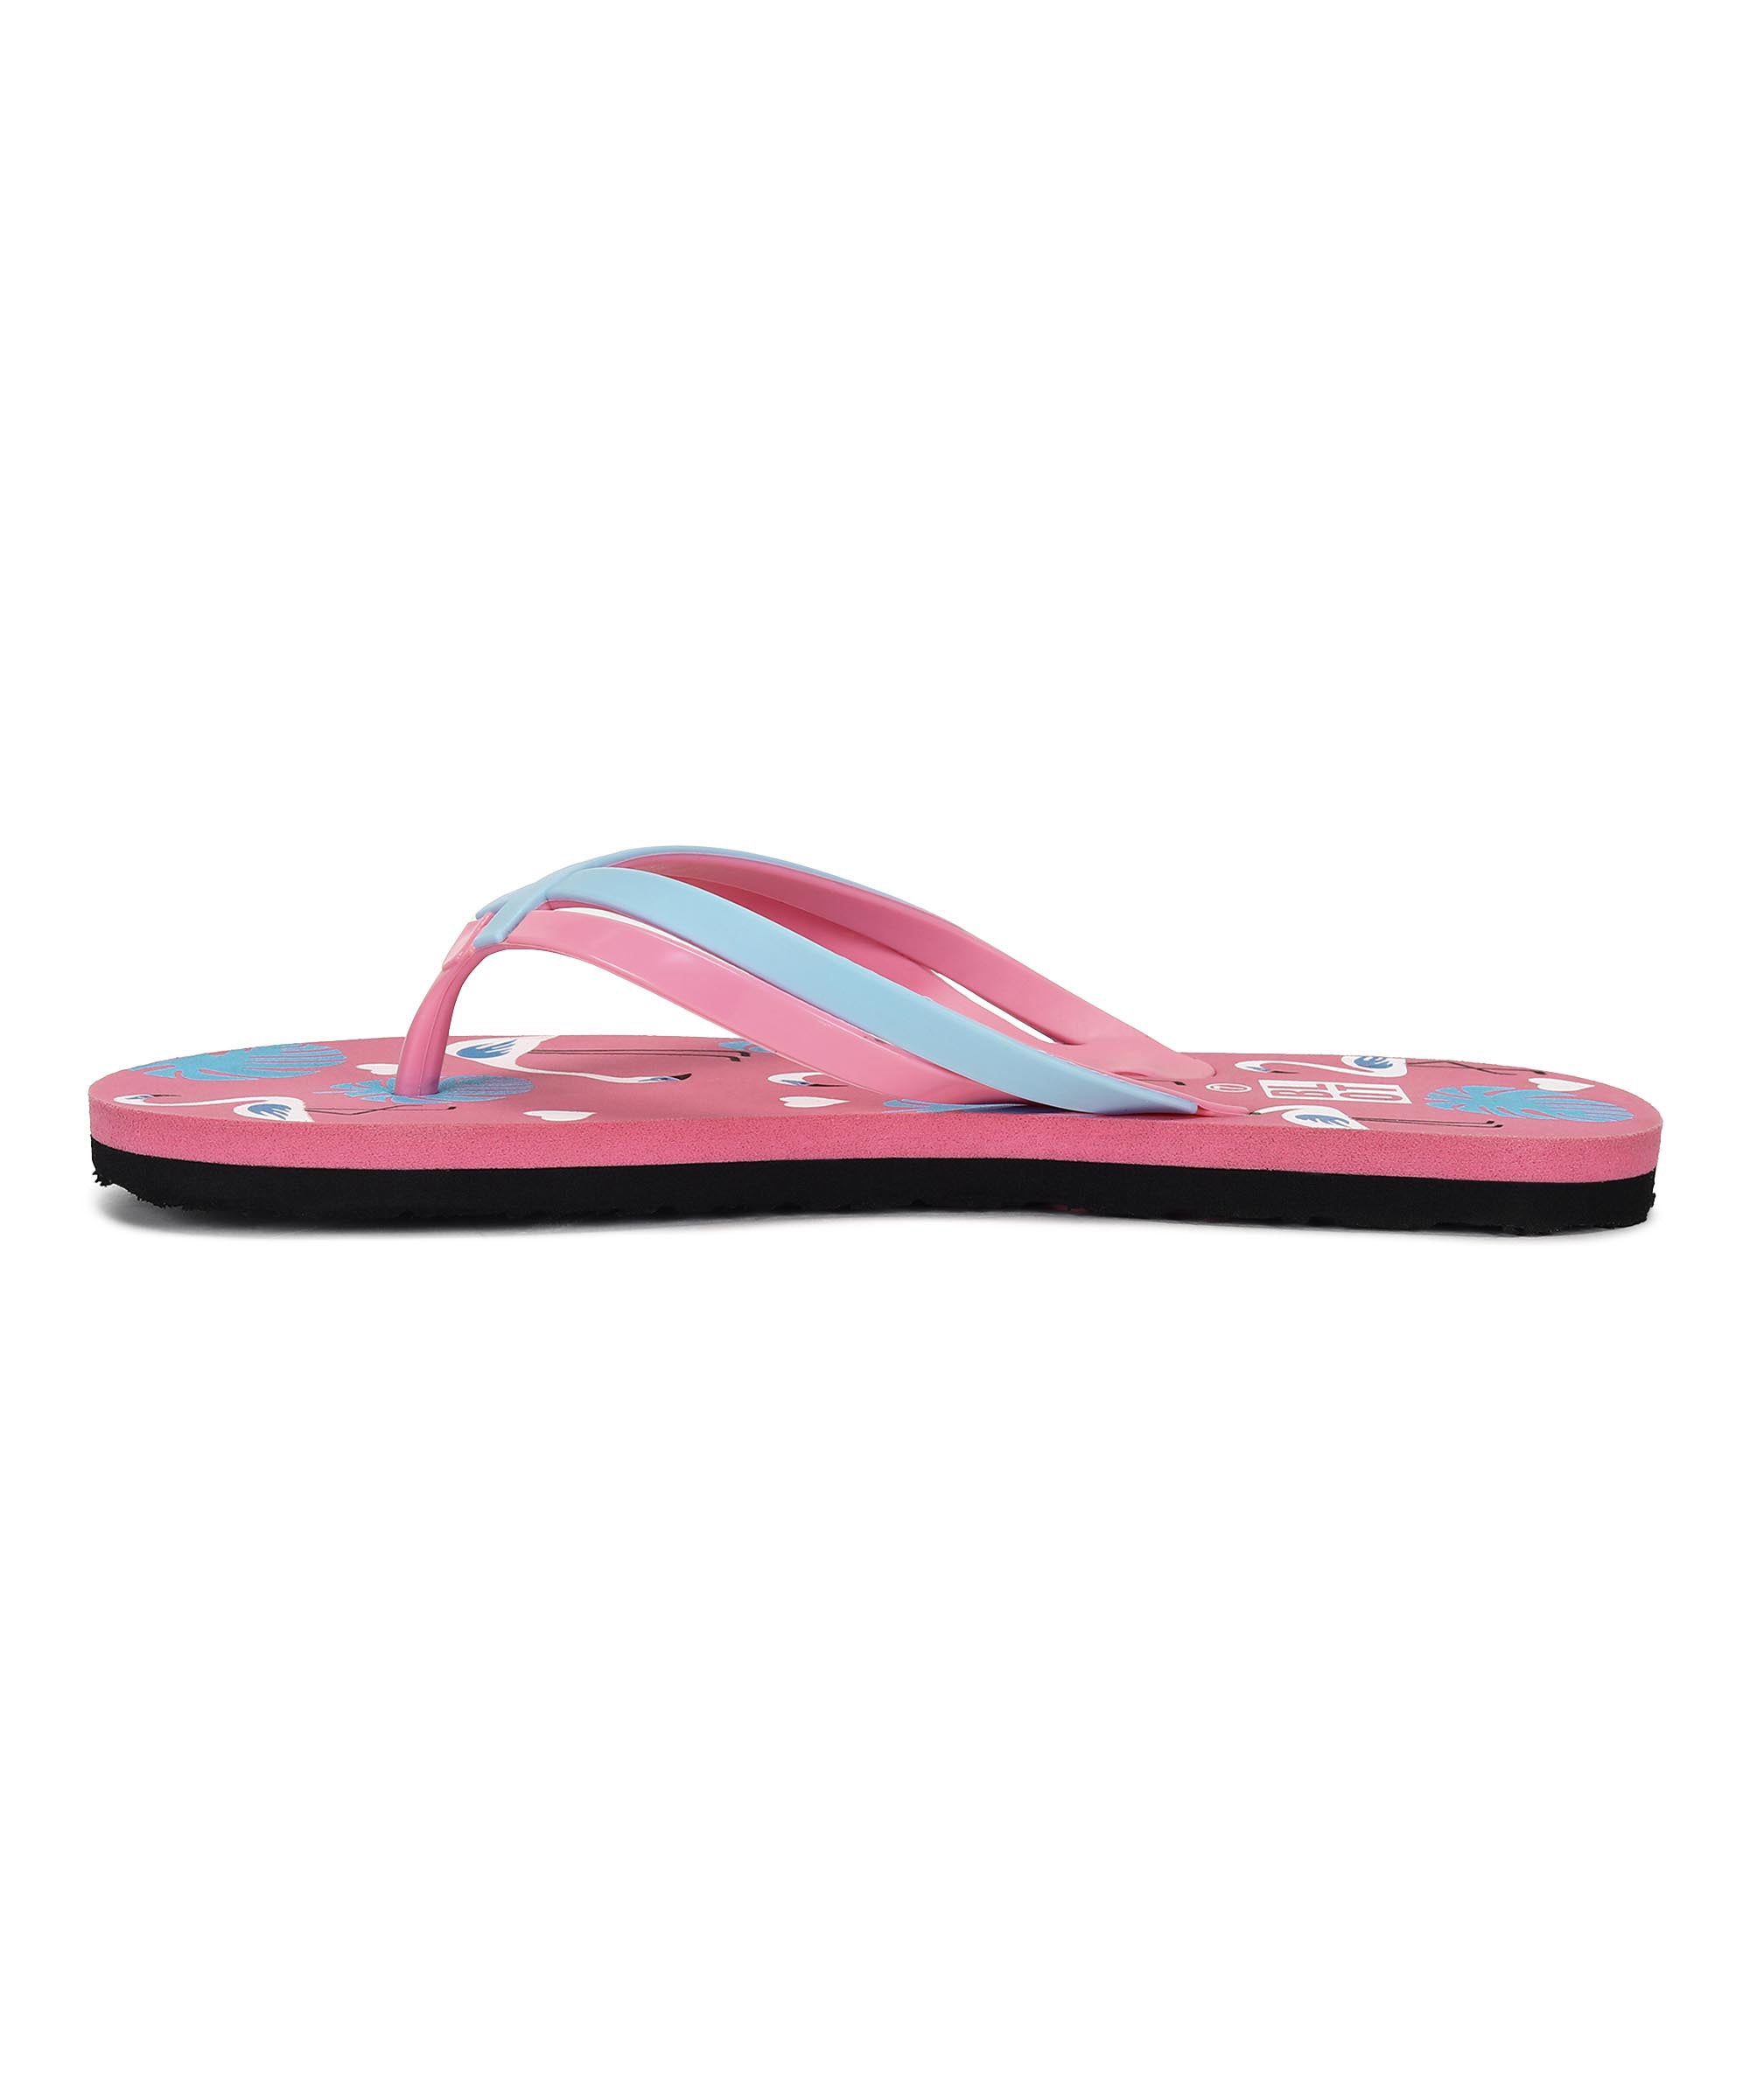 Paragon K3310L Women Stylish Flip Flops | Comfortable Flip Flops for Daily Use | Lightweight and Easy to Wash